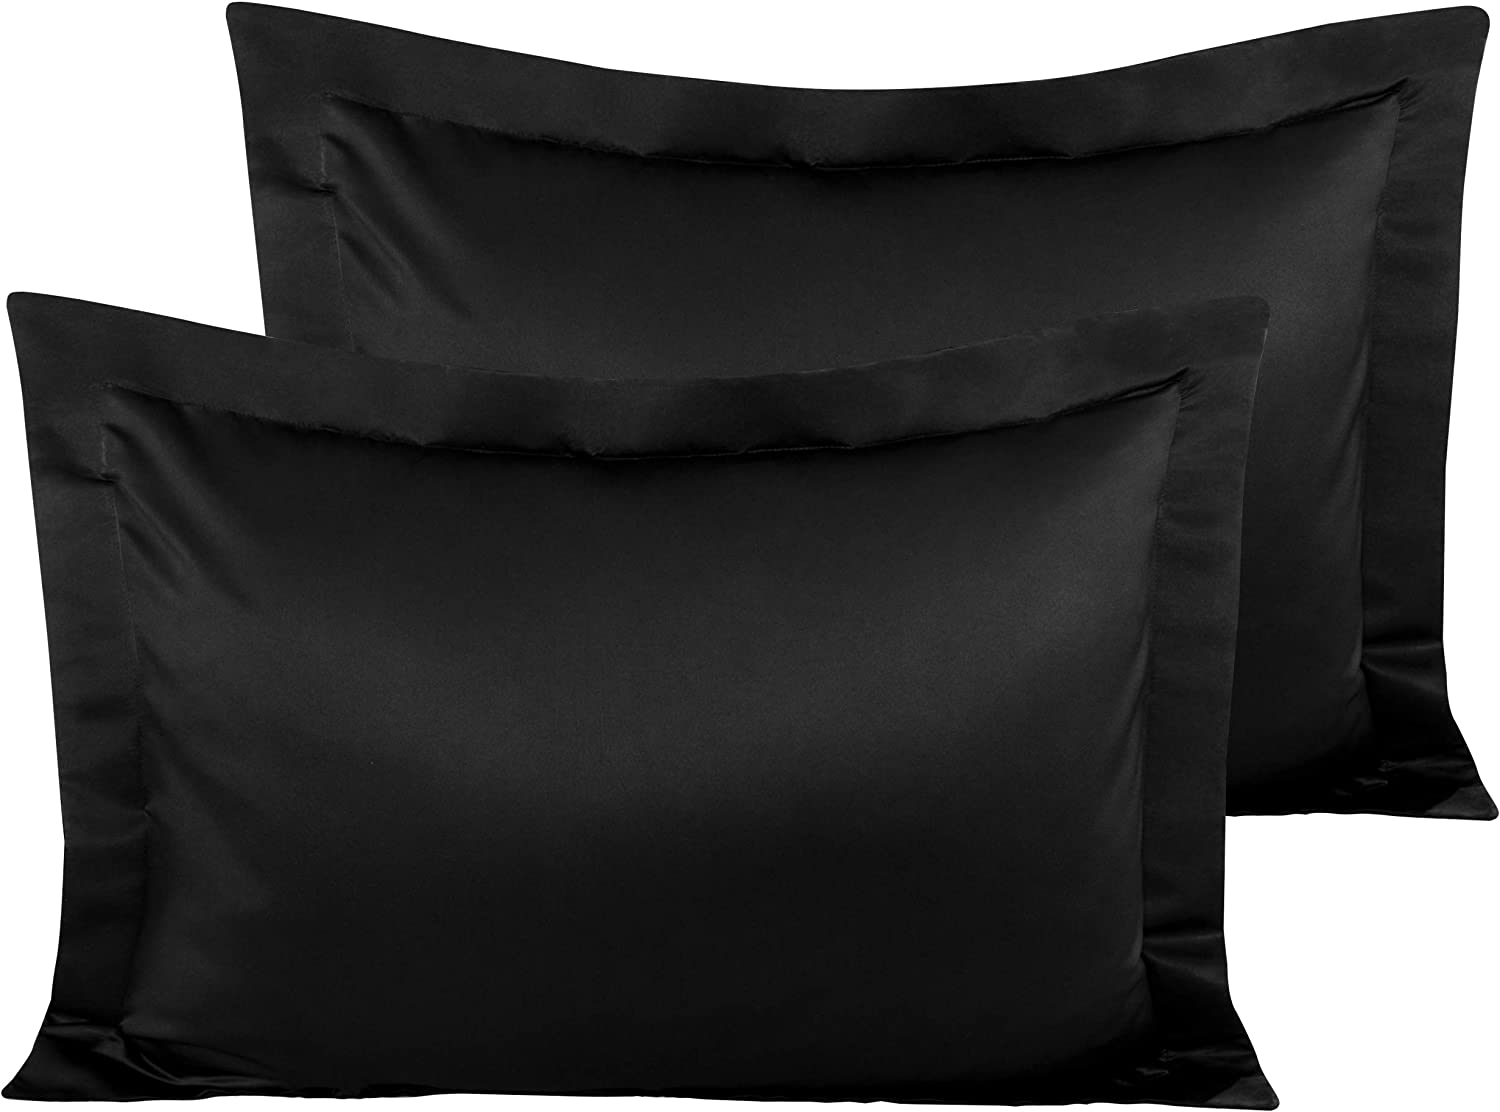 2-Pack NTBAY Satin Pillowcases (various colors): Standard Size $4, Queen Size From $4, King Size or Euro Size $5.60 + Free Shipping